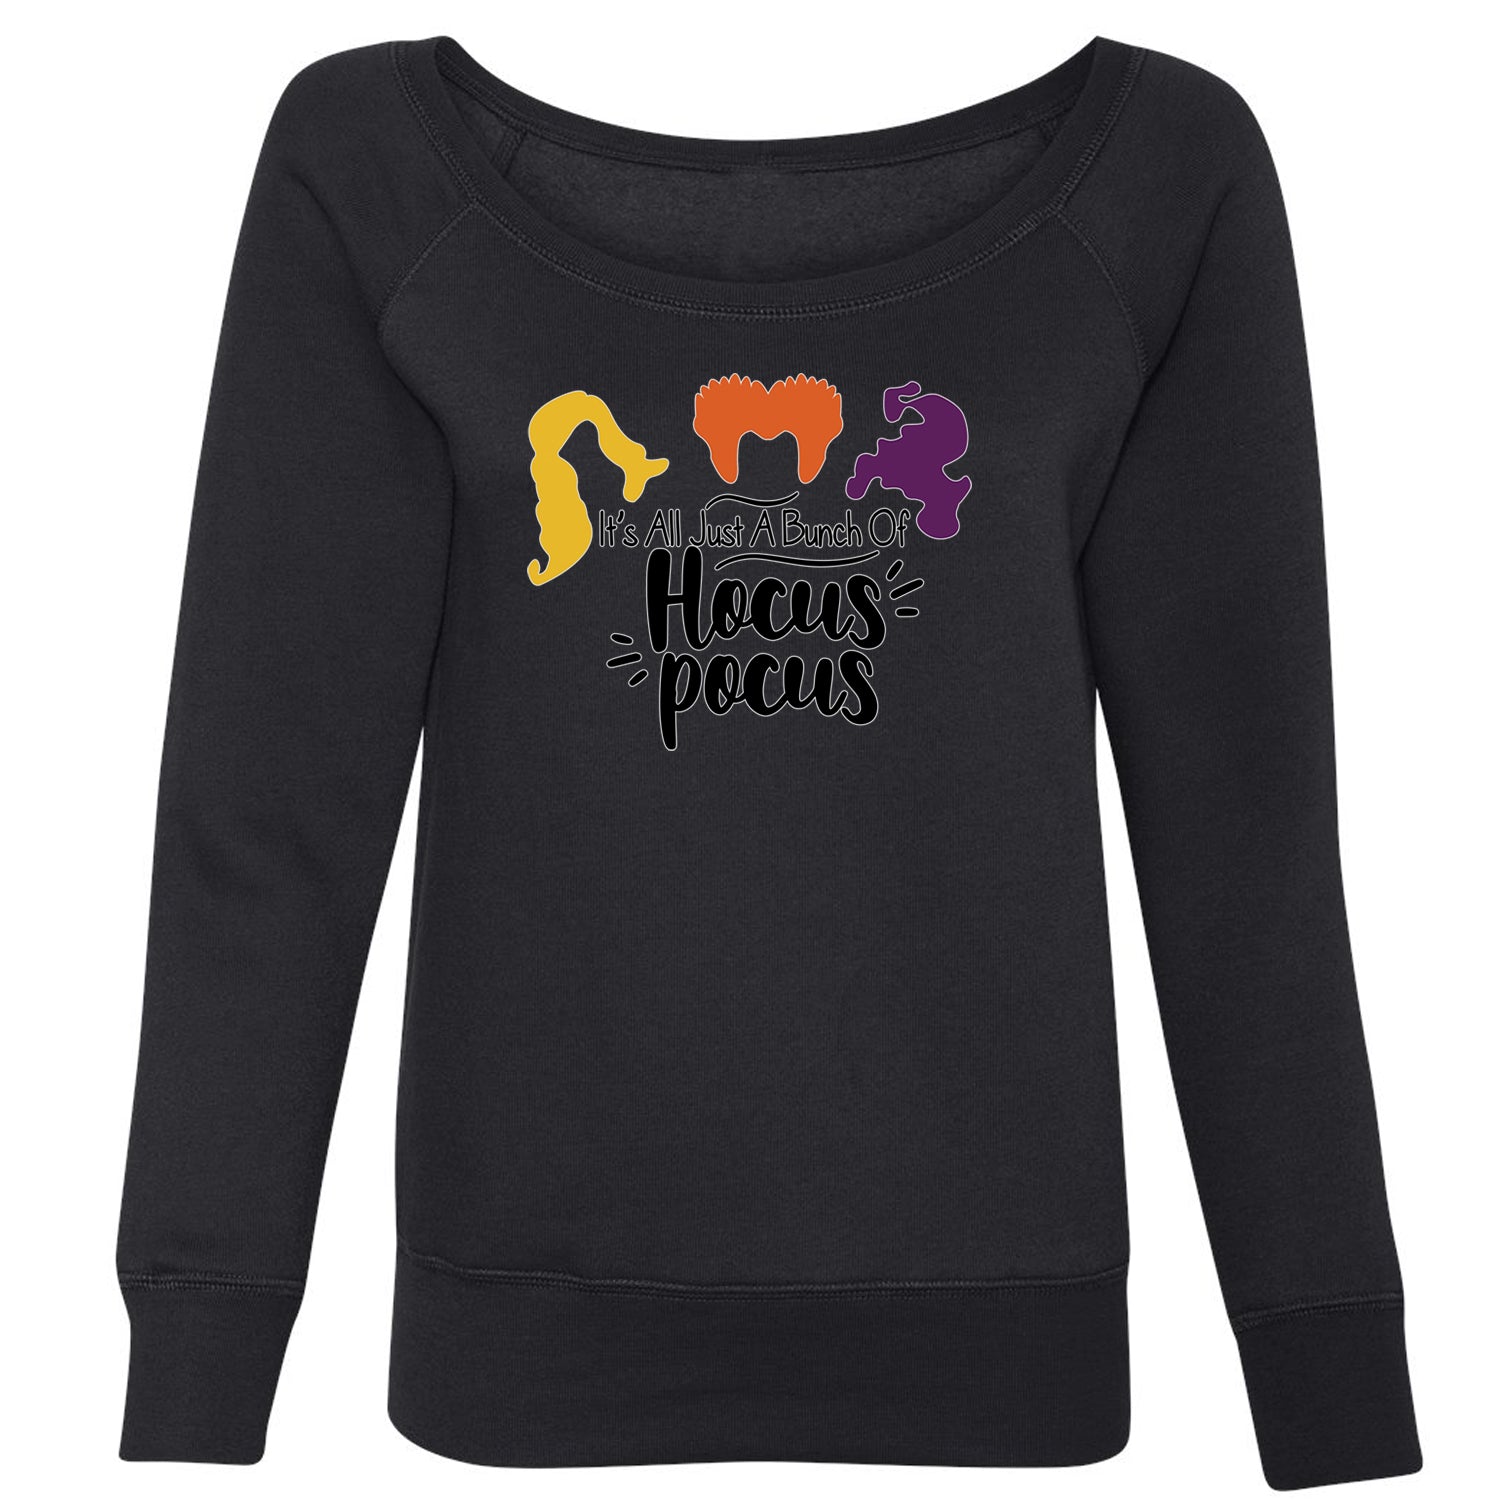 It's Just A Bunch Of Hocus Pocus Slouchy Off Shoulder Oversized Sweatshirt descendants, enchanted, eve, hallows, hocus, or, pocus, sanderson, sisters, treat, trick, witches by Expression Tees